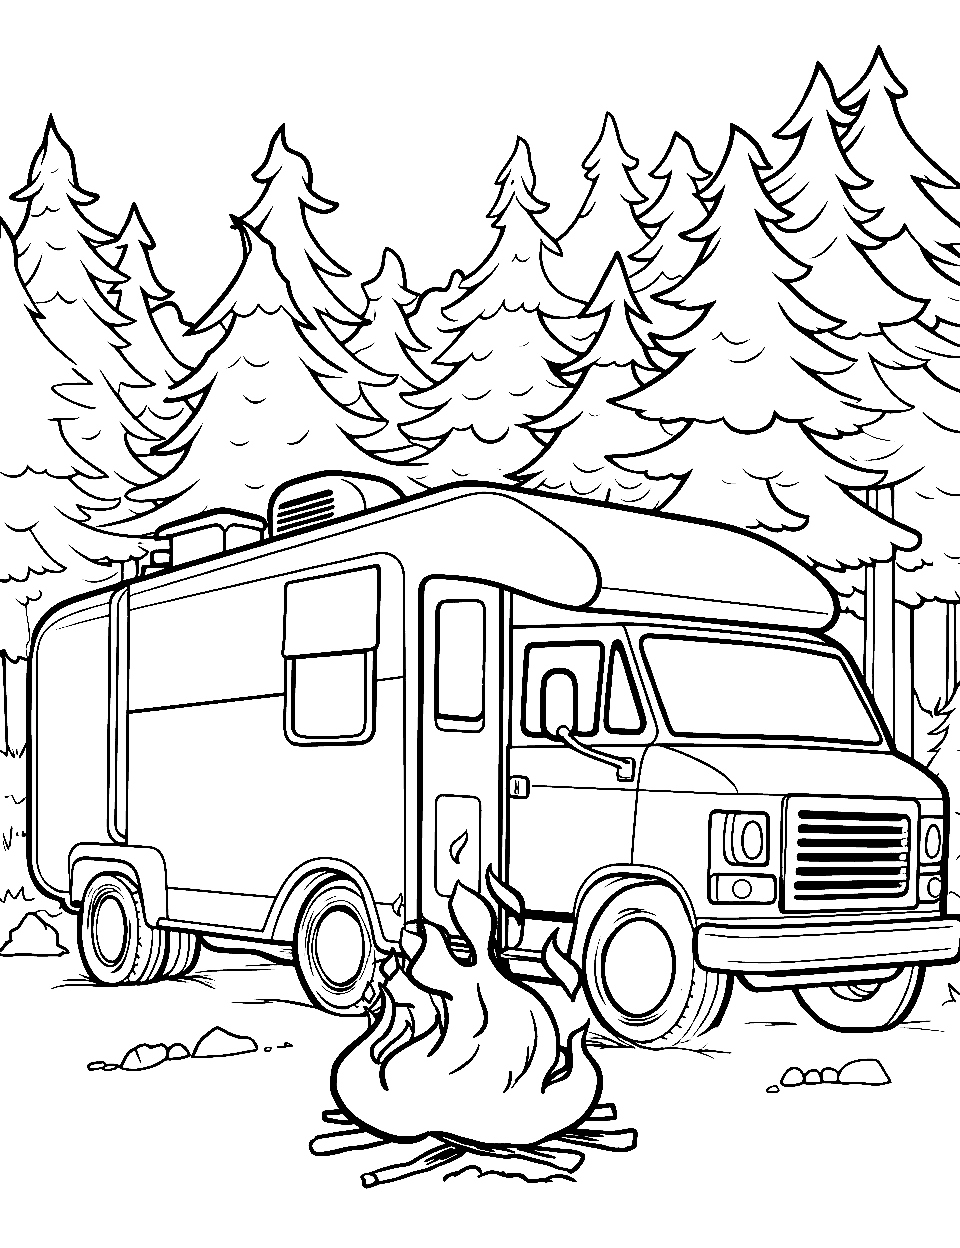 Camping Trip Fire Safety Truck Coloring Page - An RV fire truck near a campsite.